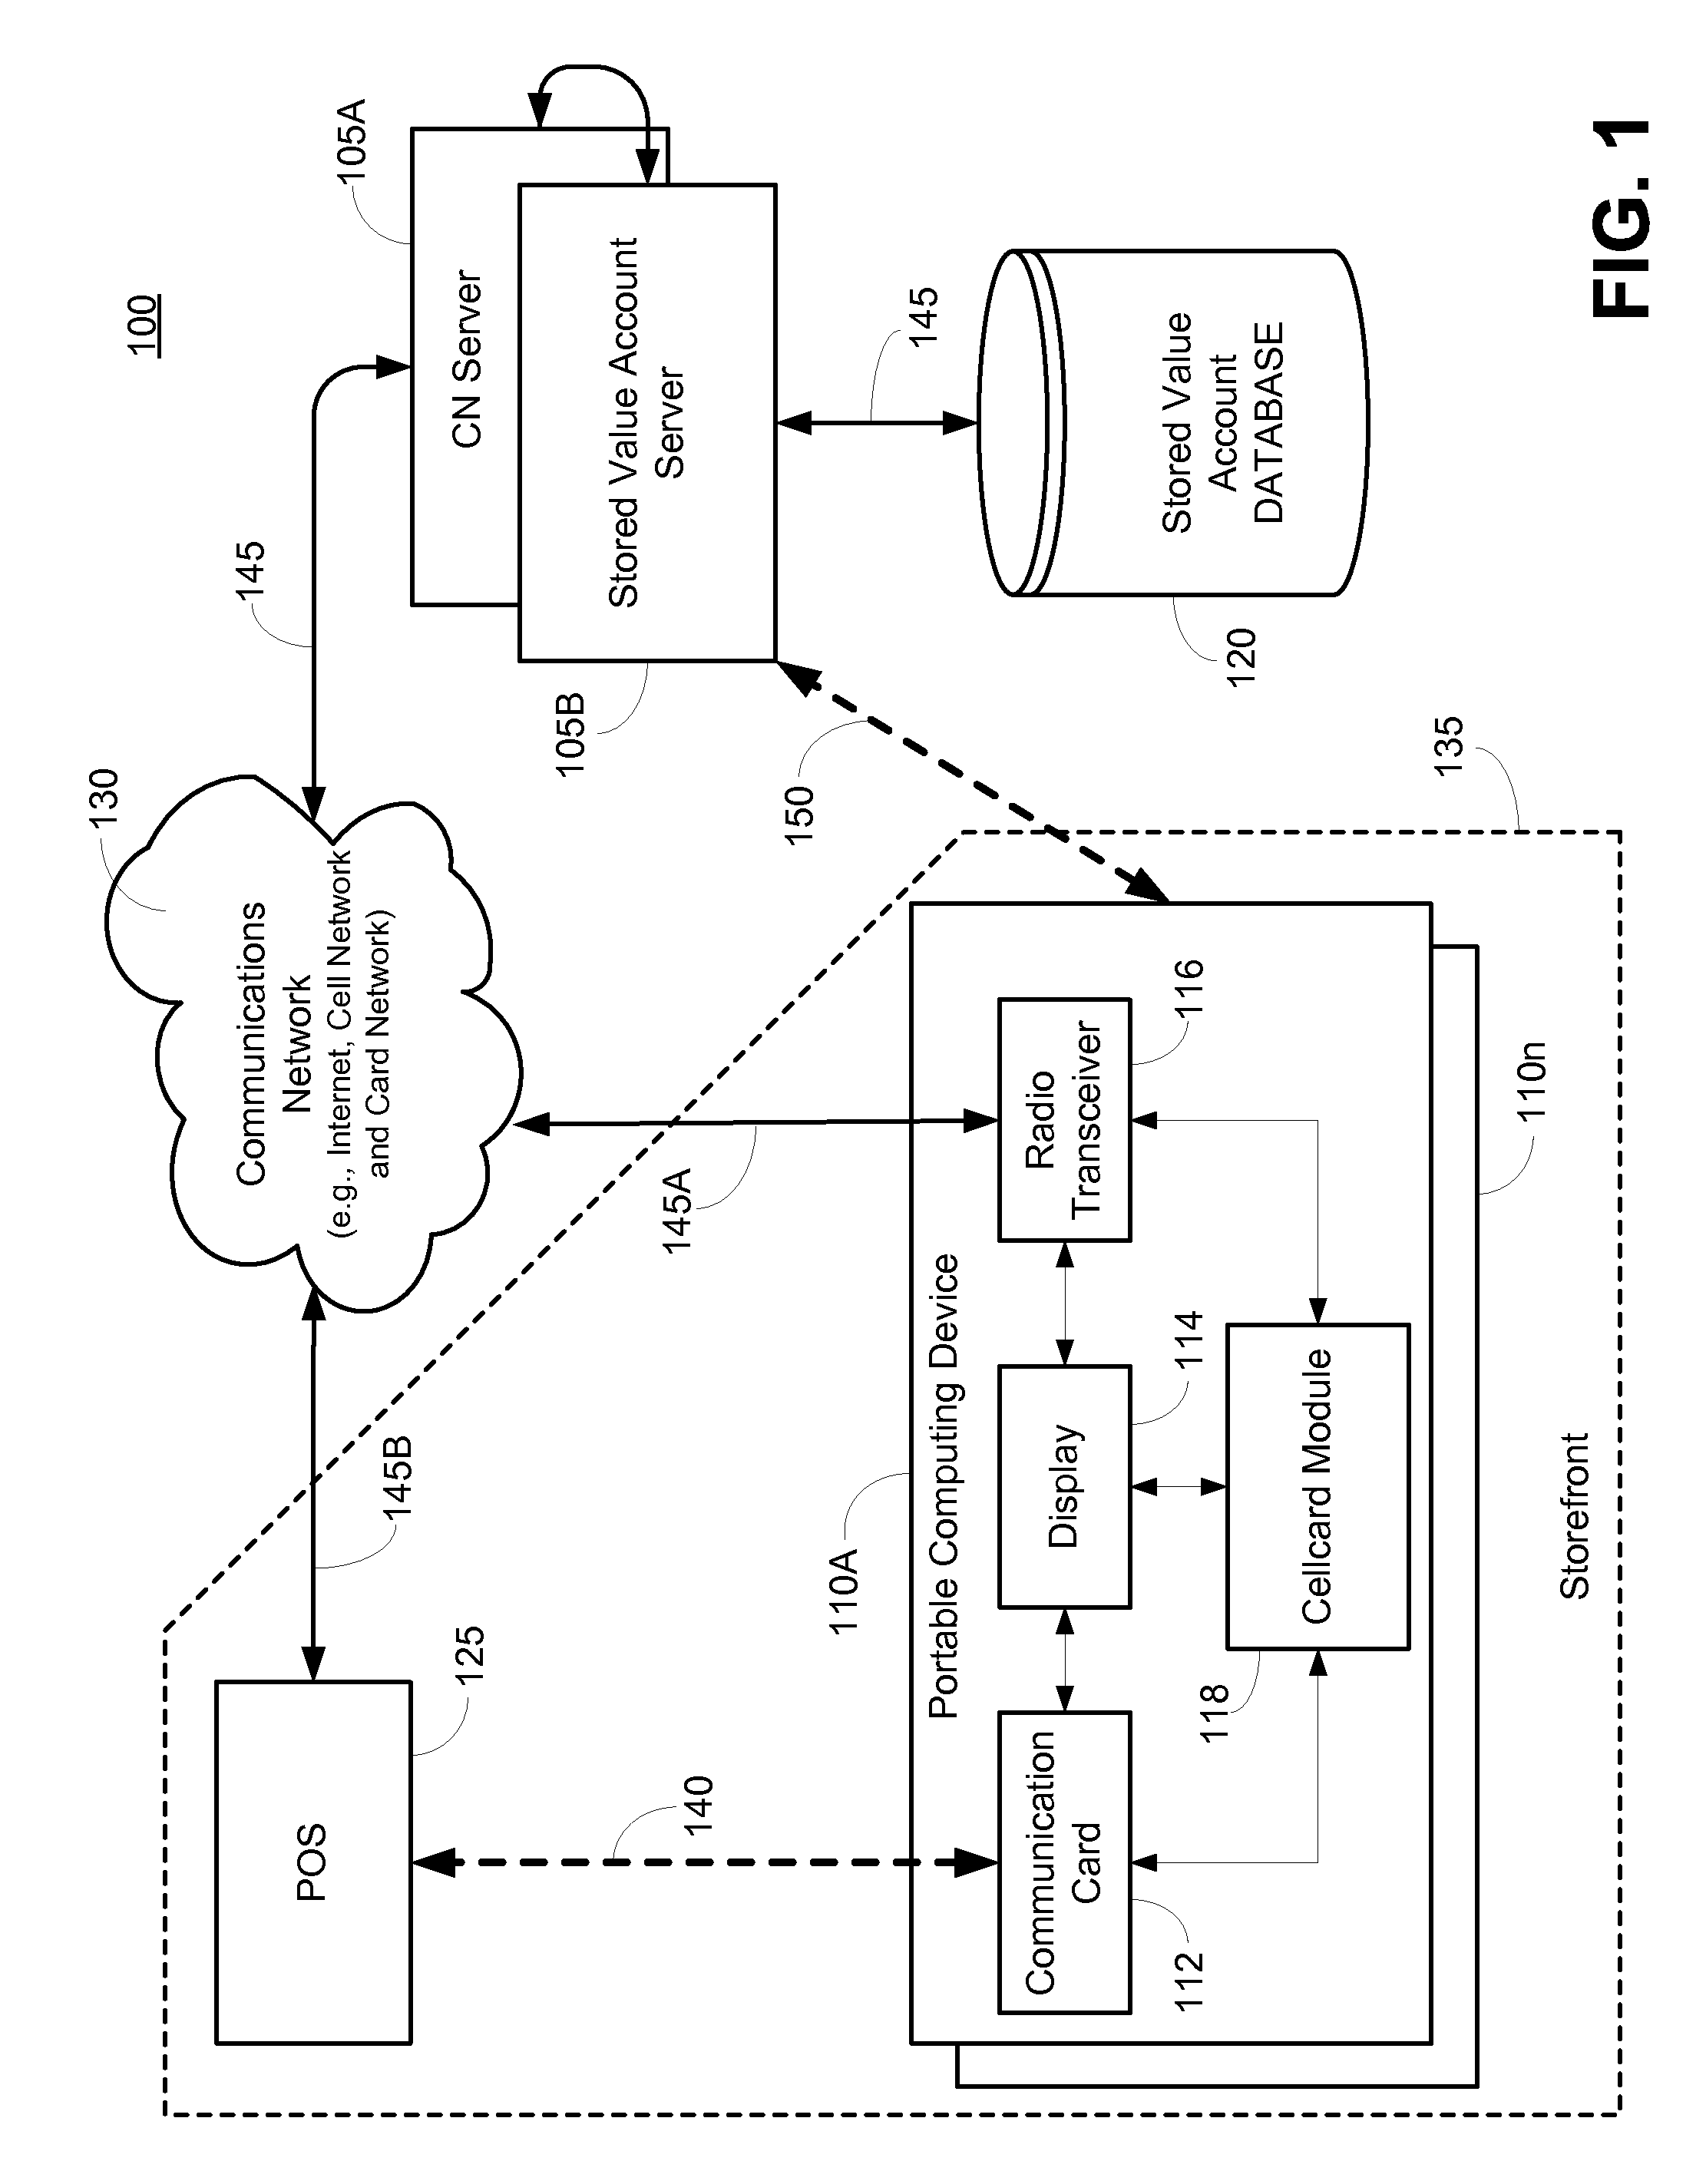 System and method for presentment of nonconfidential transaction token identifier